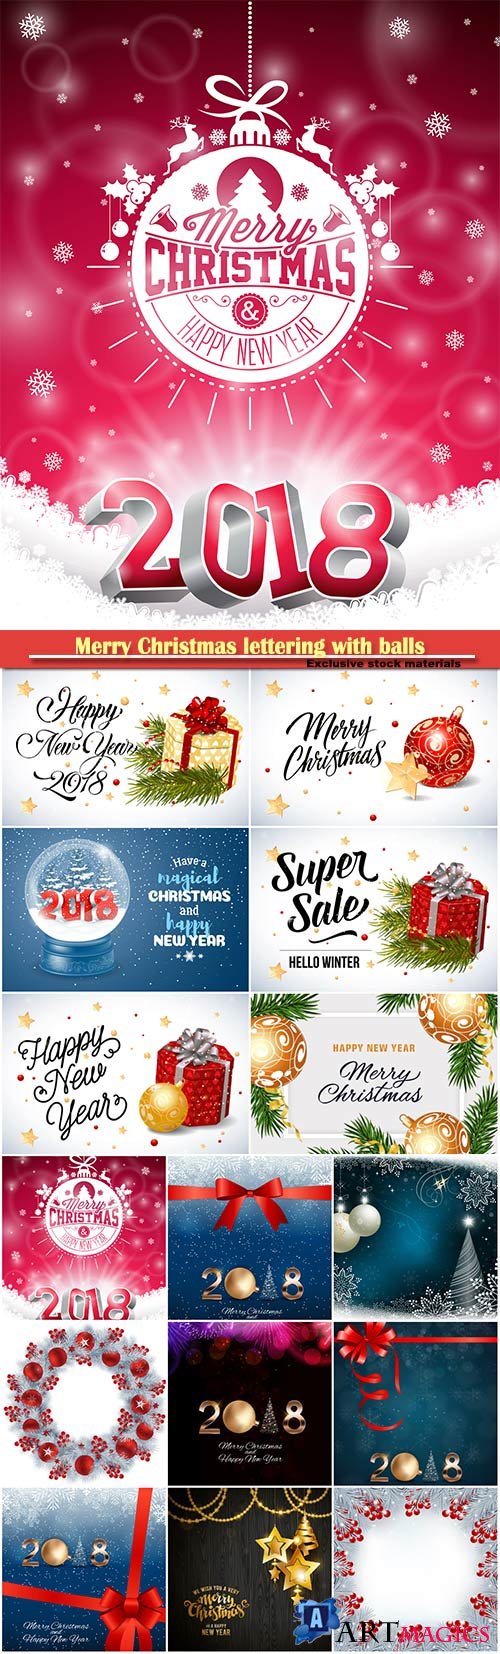 Merry Christmas lettering with balls design vector template